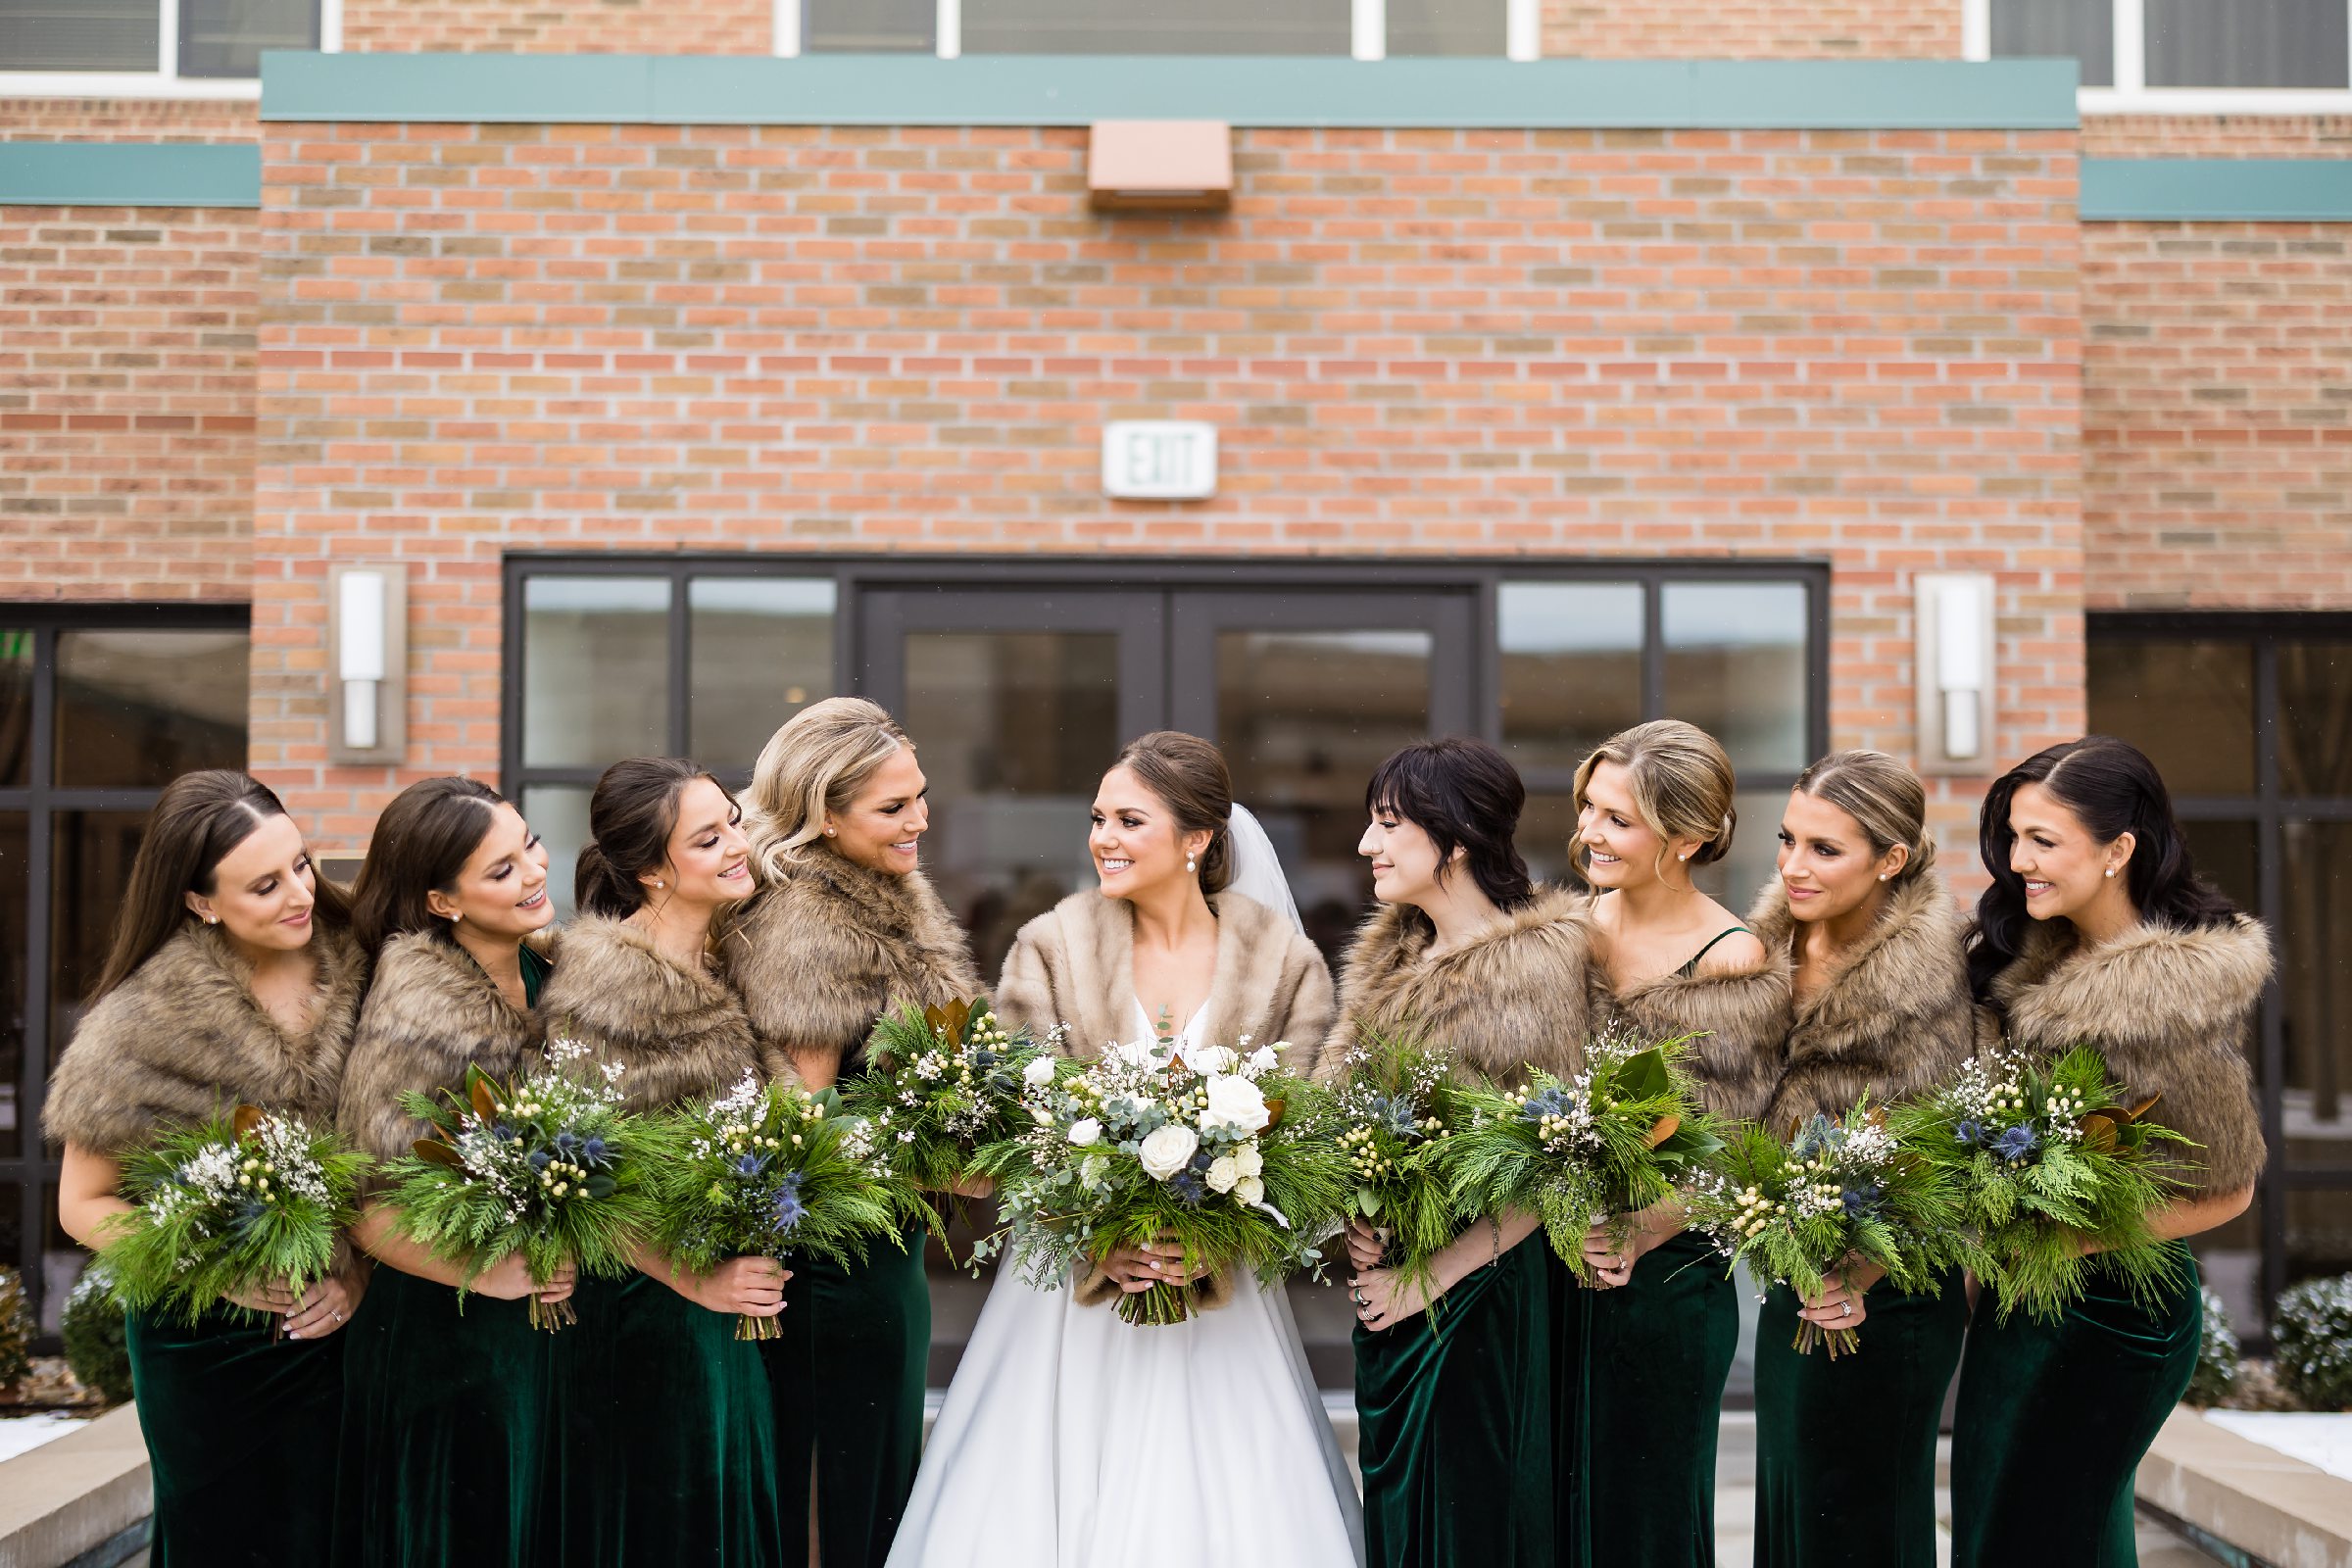 bride and bridesmaids take formal wedding party photos outside in the chilly air holding bouquets by Detroit Wedding Photographer Michele Maloney 